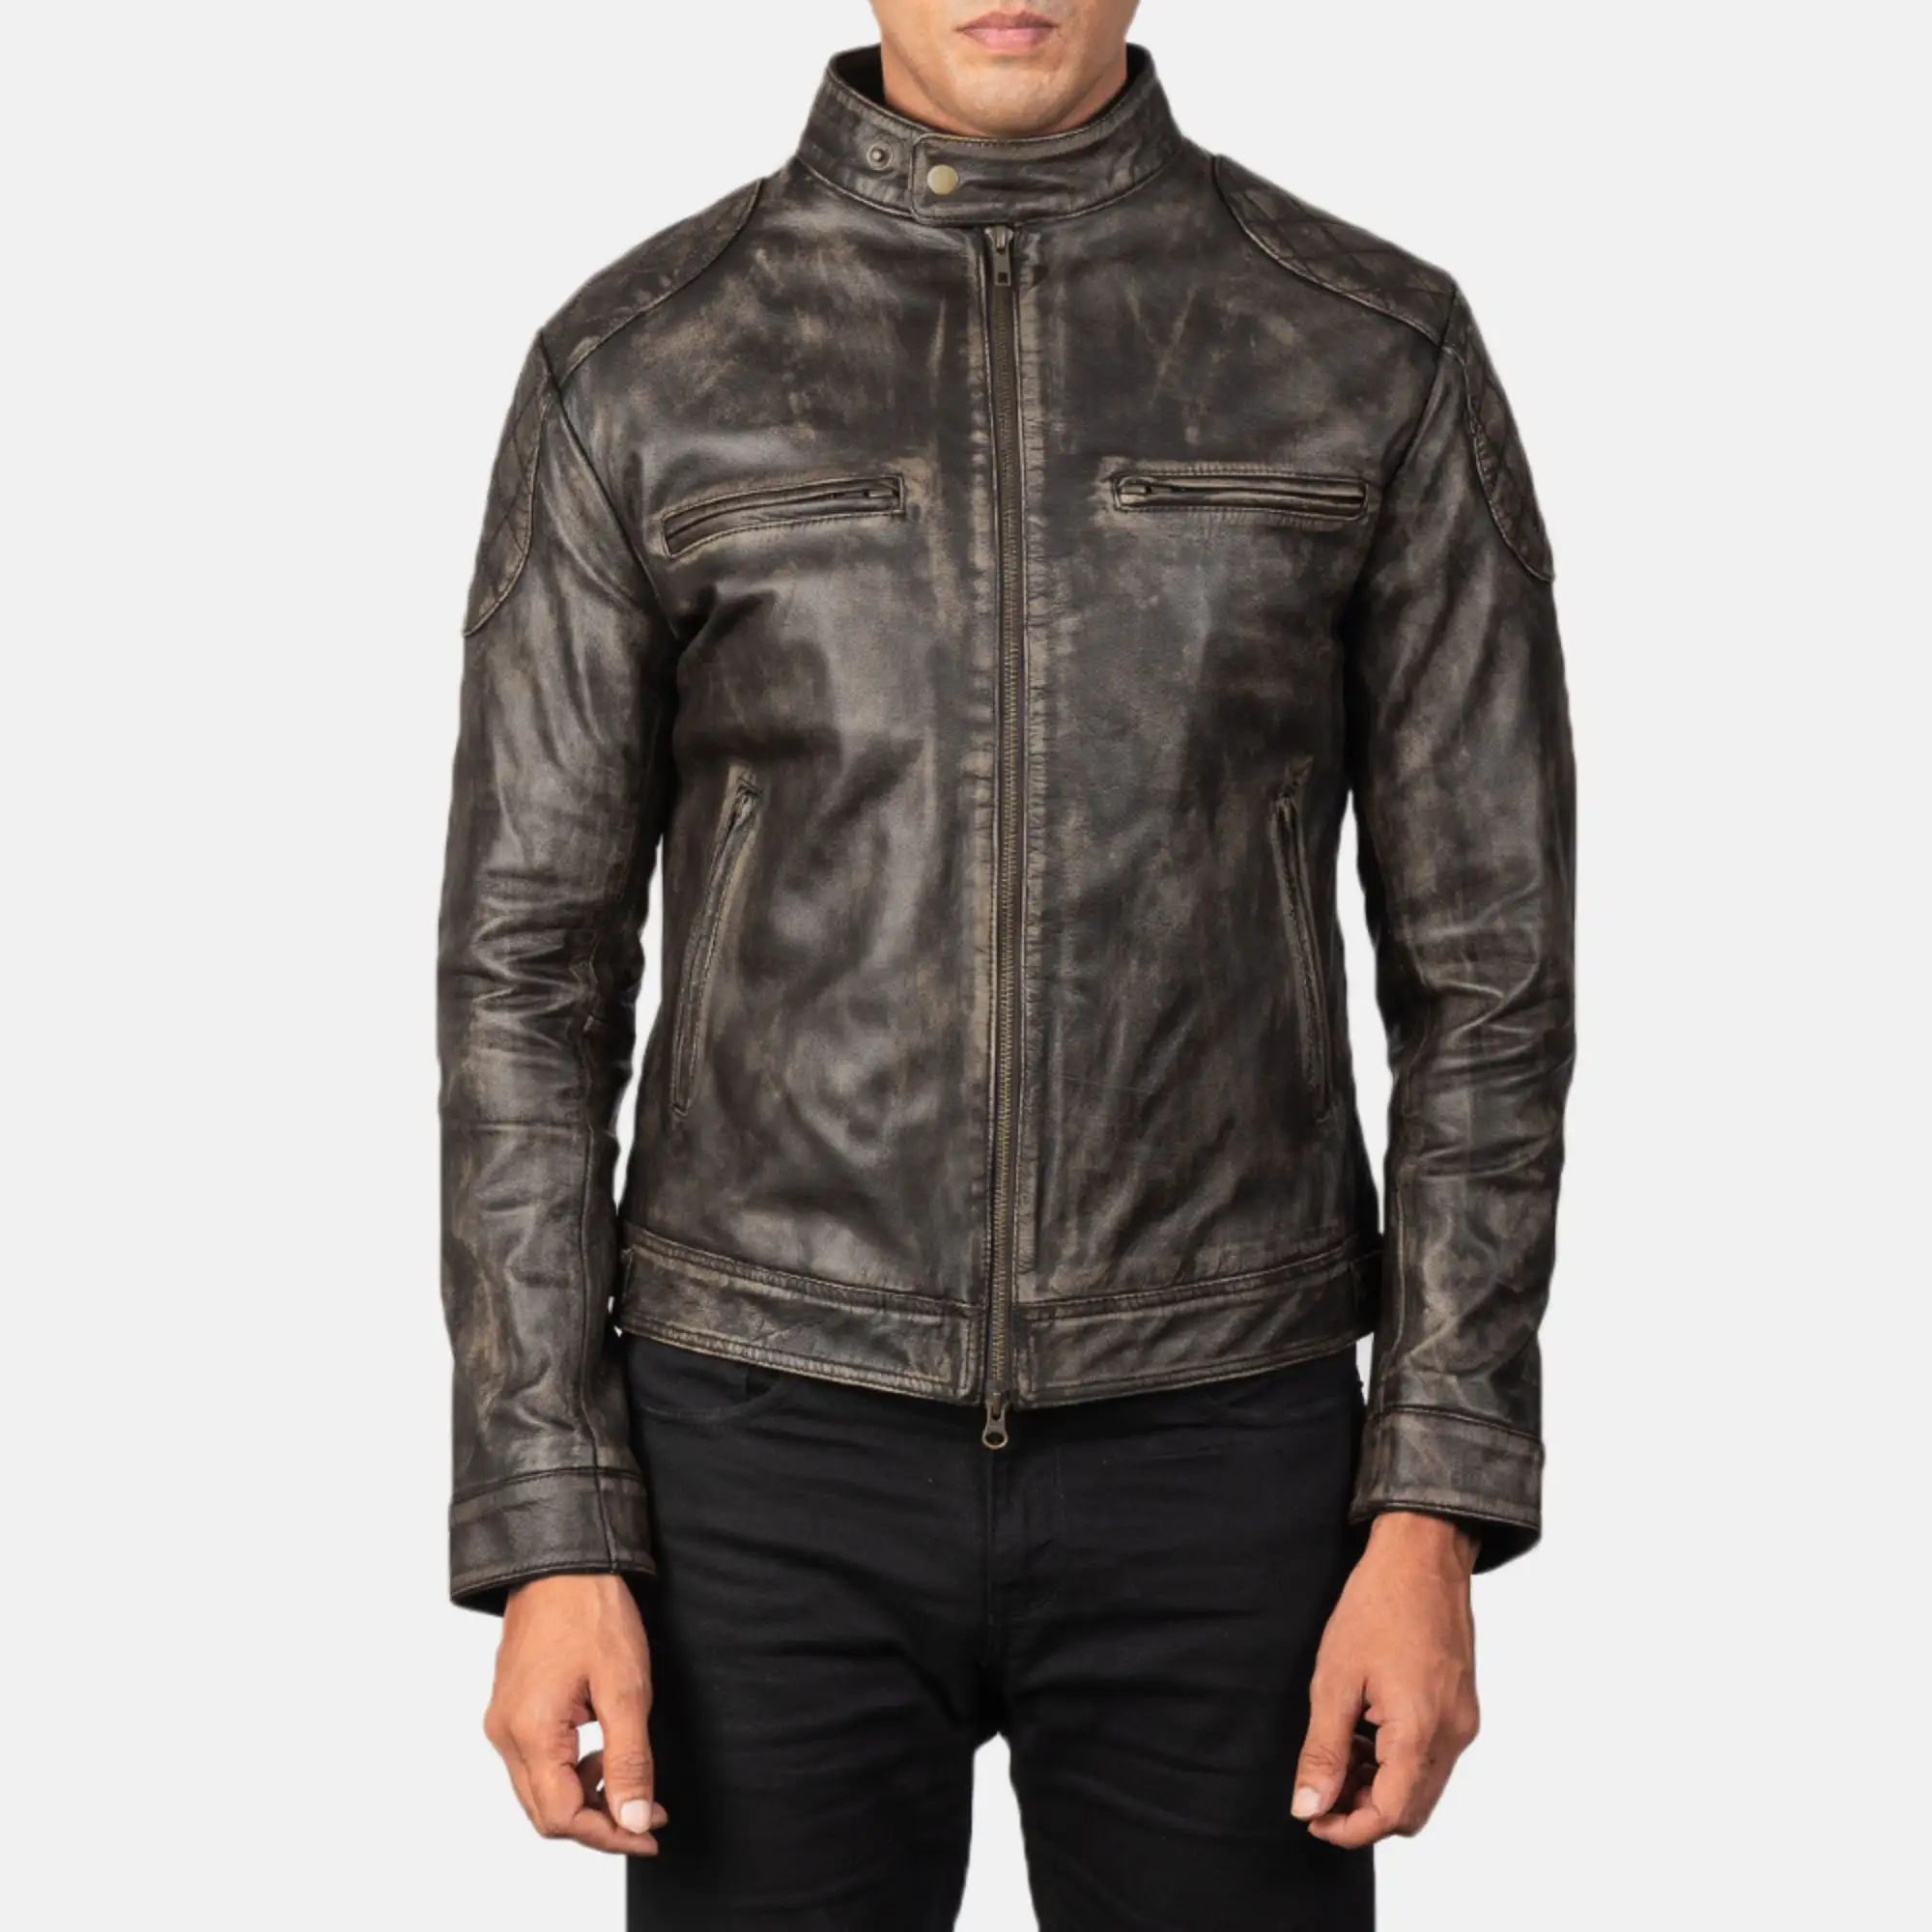 Real Leather Sheepskin Aniline Zipper Gatsby Distresed Brown Men Biker Jacket with Quilted Viscose Lining Inside Outside Pocket